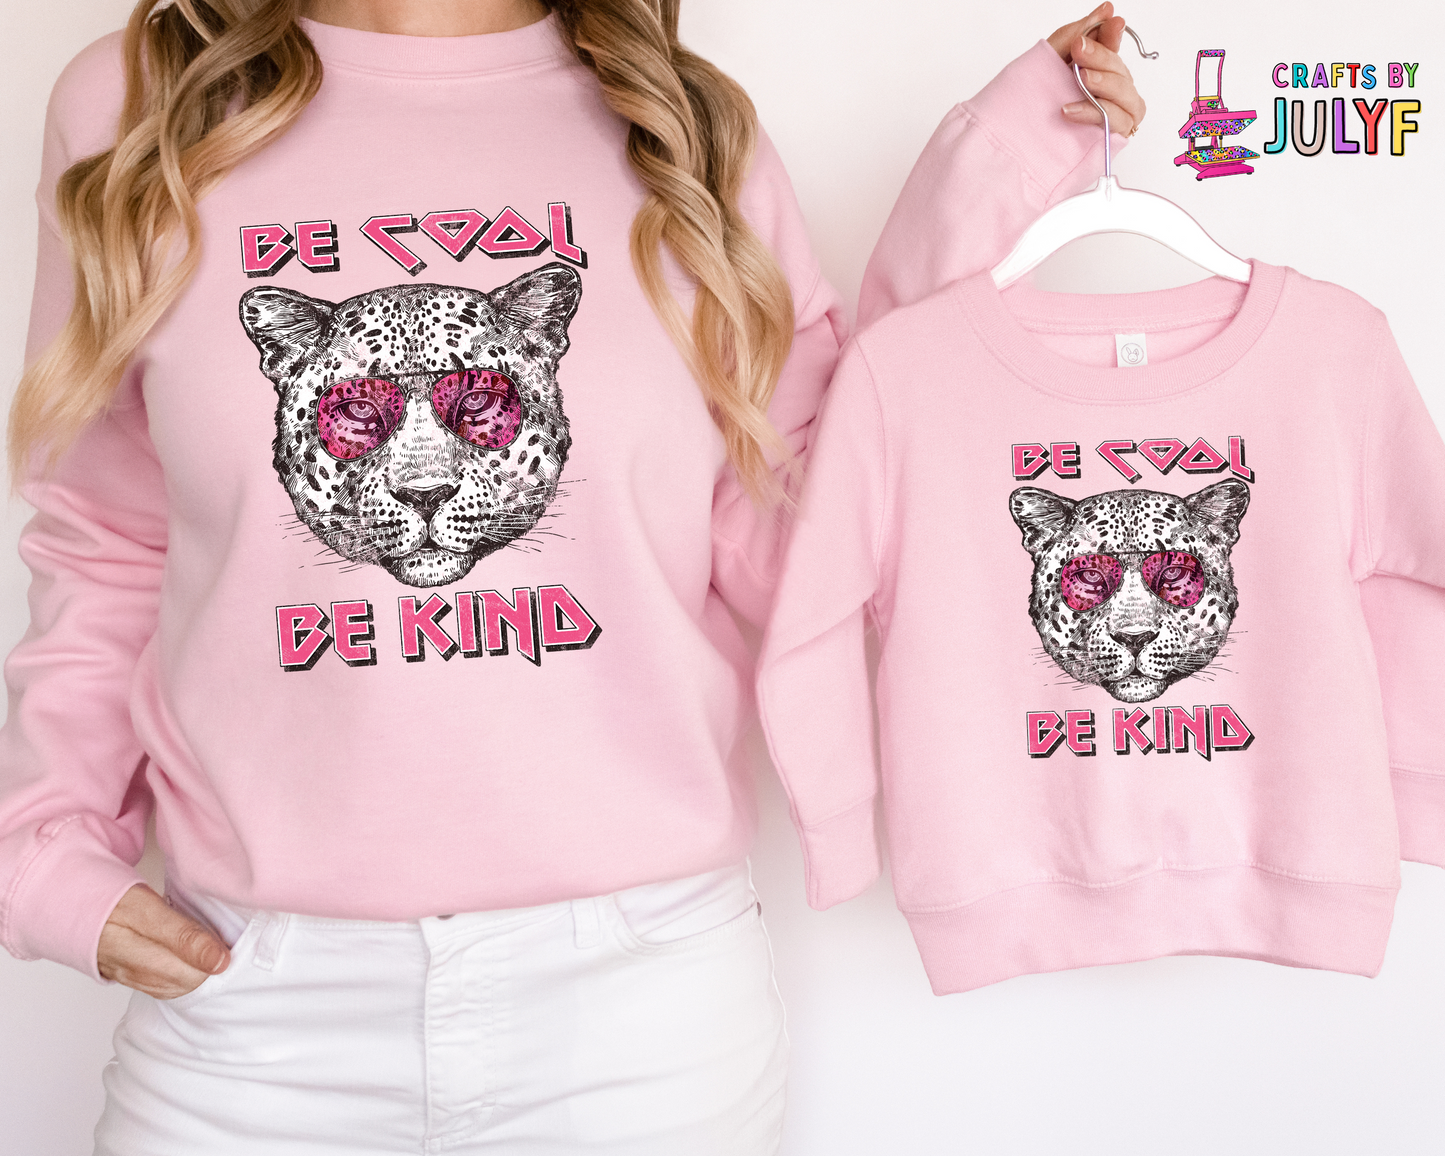 Be cool be kind sweater